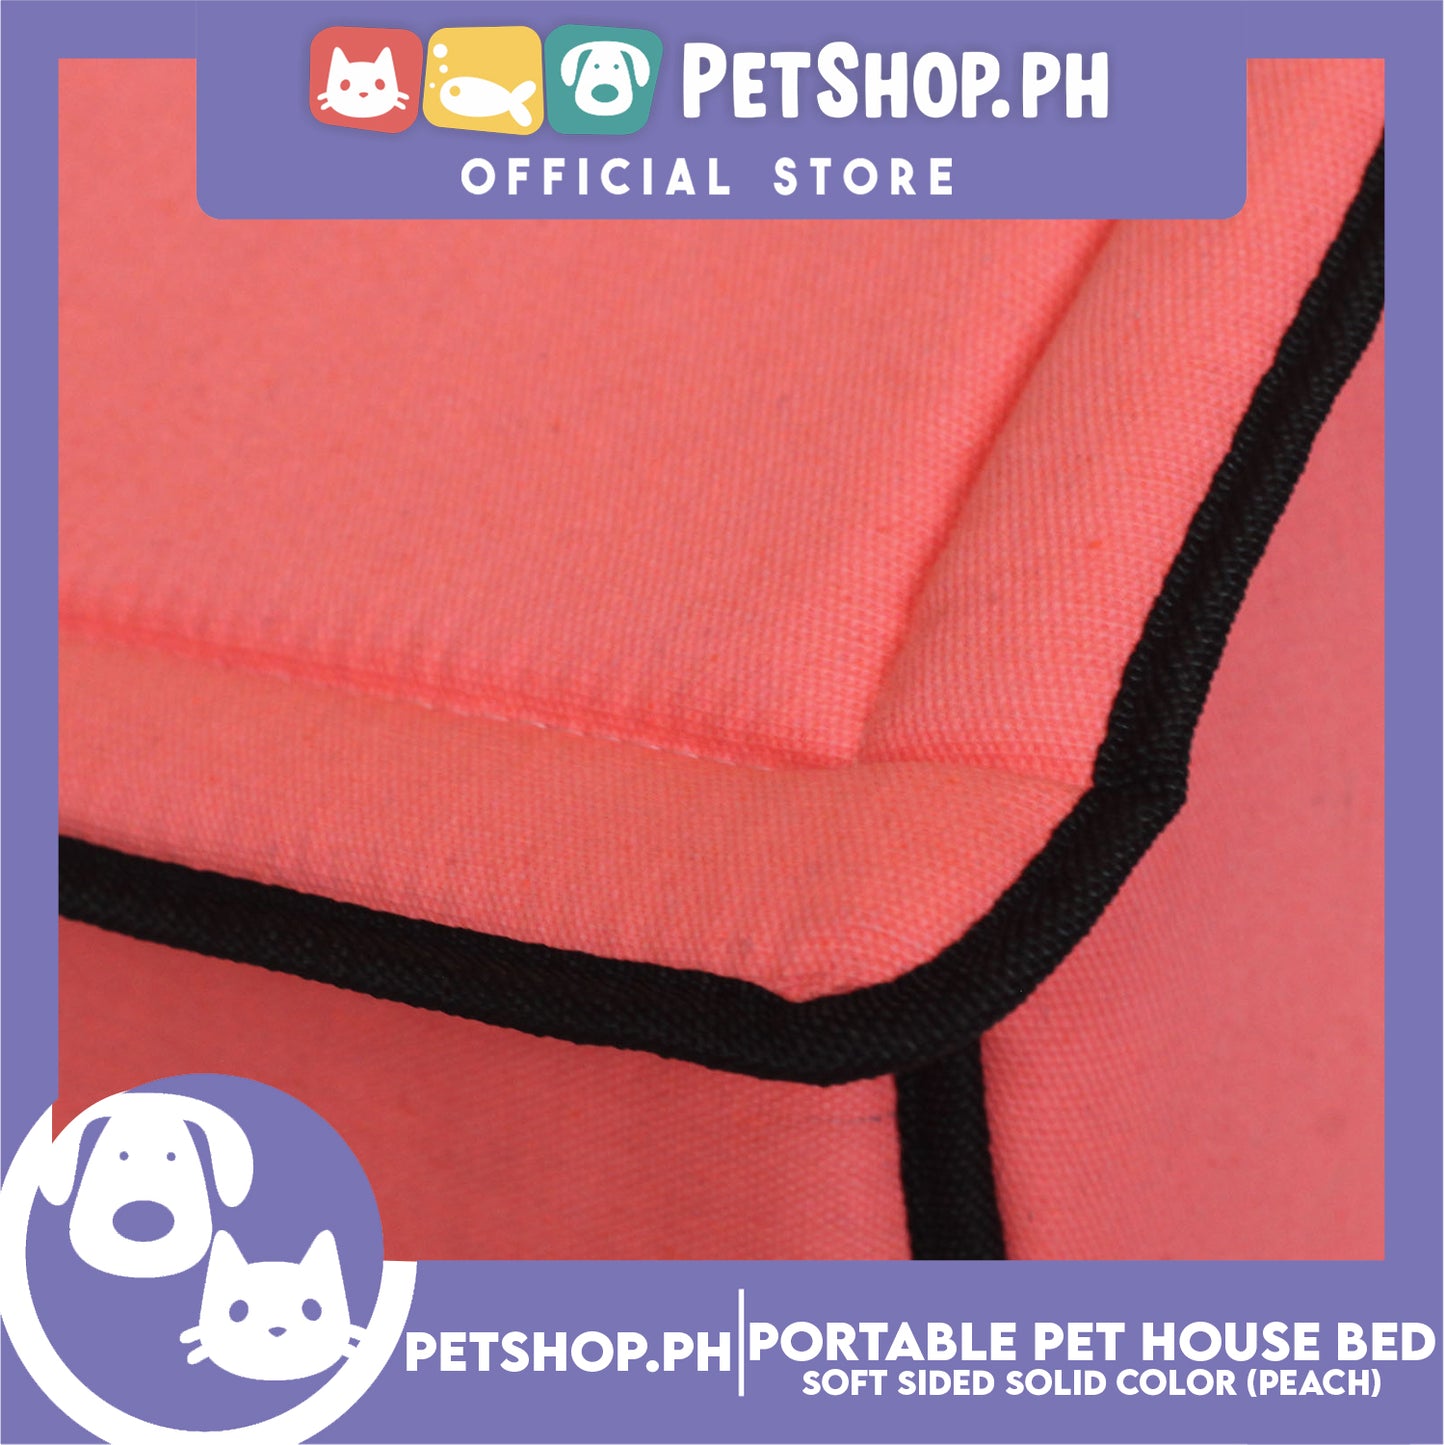 Portable Pet House Bed With Soft Sided Solid Color 25x31x32cm Small (Peach)